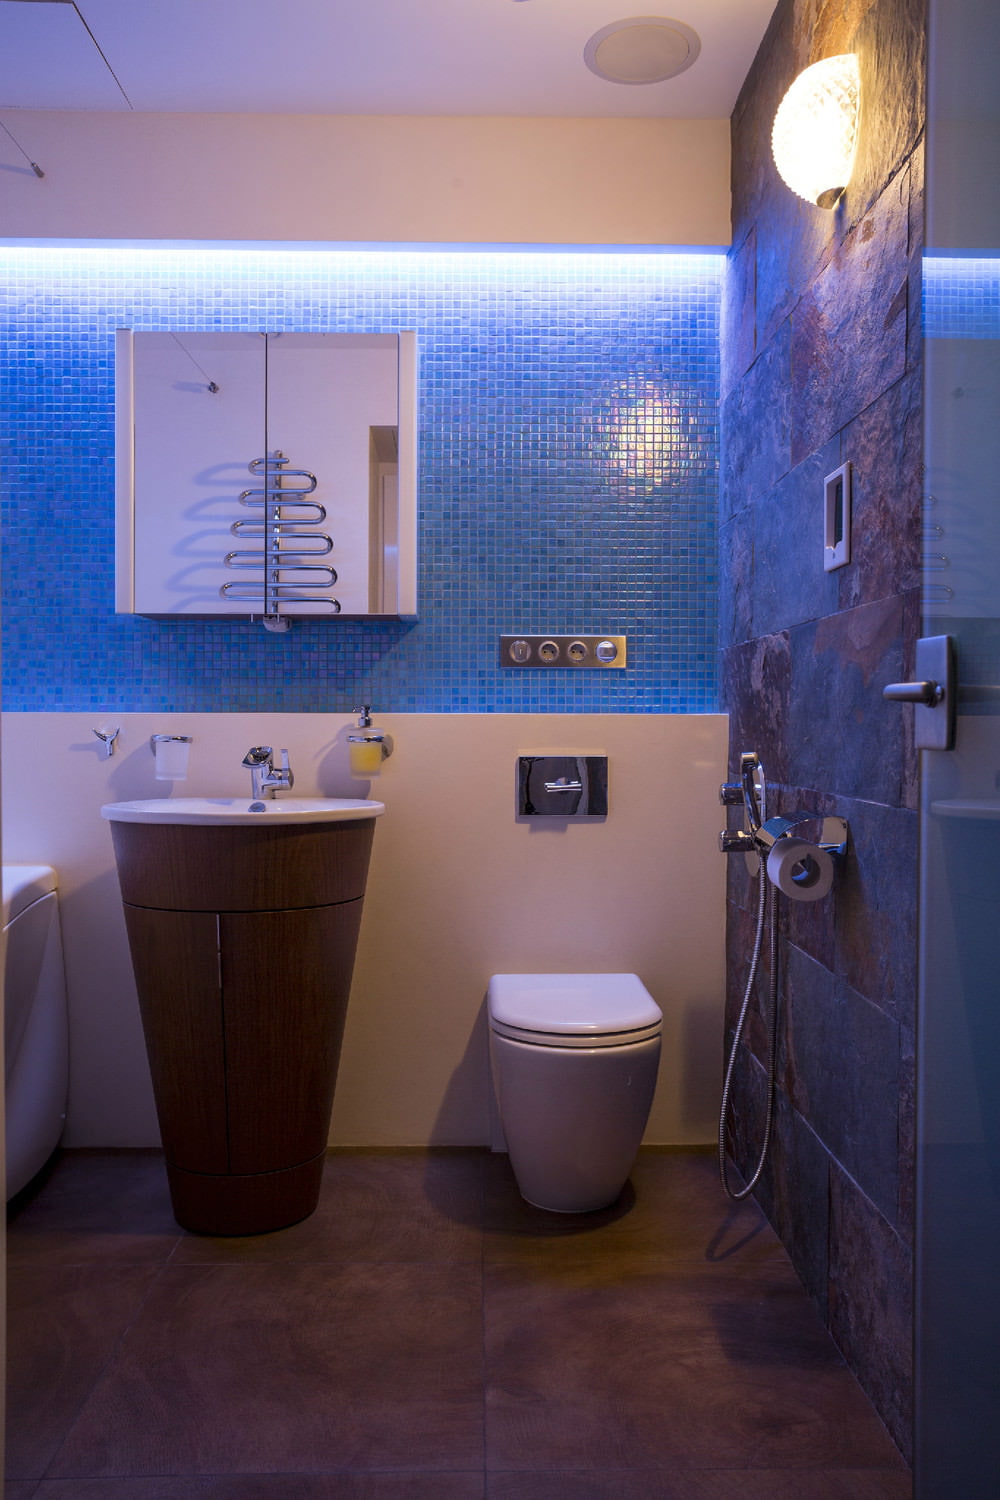 Bathroom in the design of a two-room apartment of 43 sq. m.